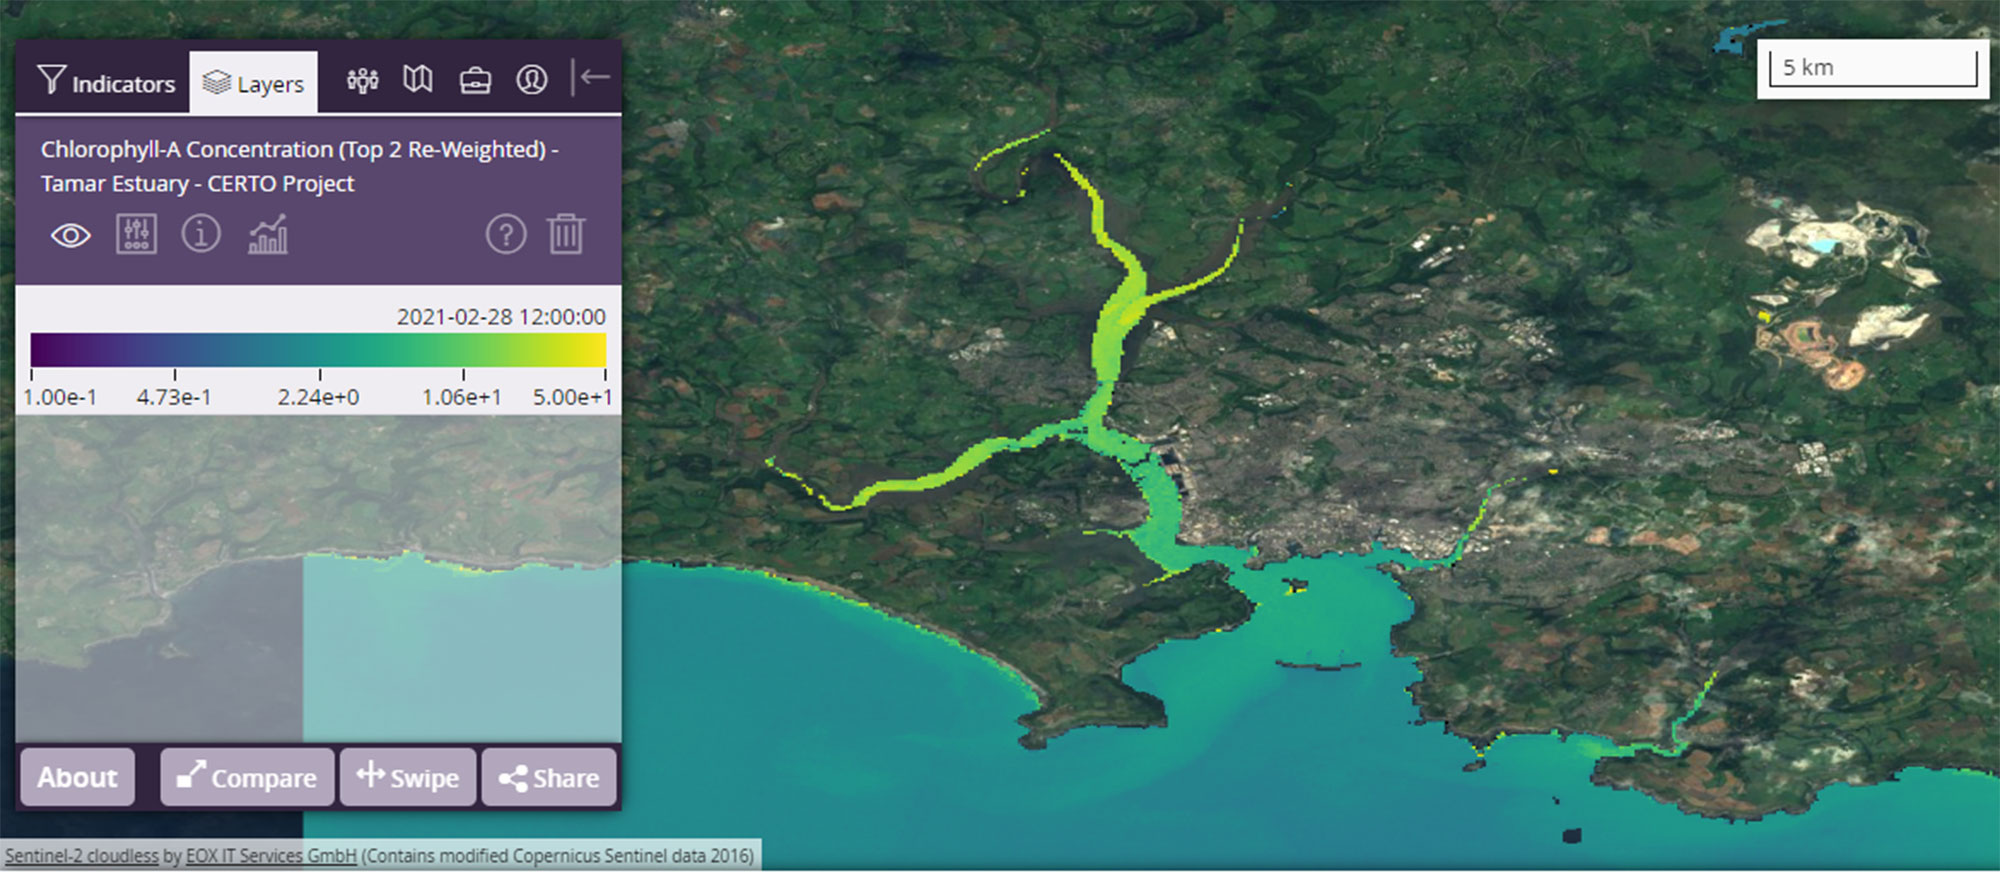 Satellite image showing chlorophyll-a concentration in the river Tamar near Plymouth